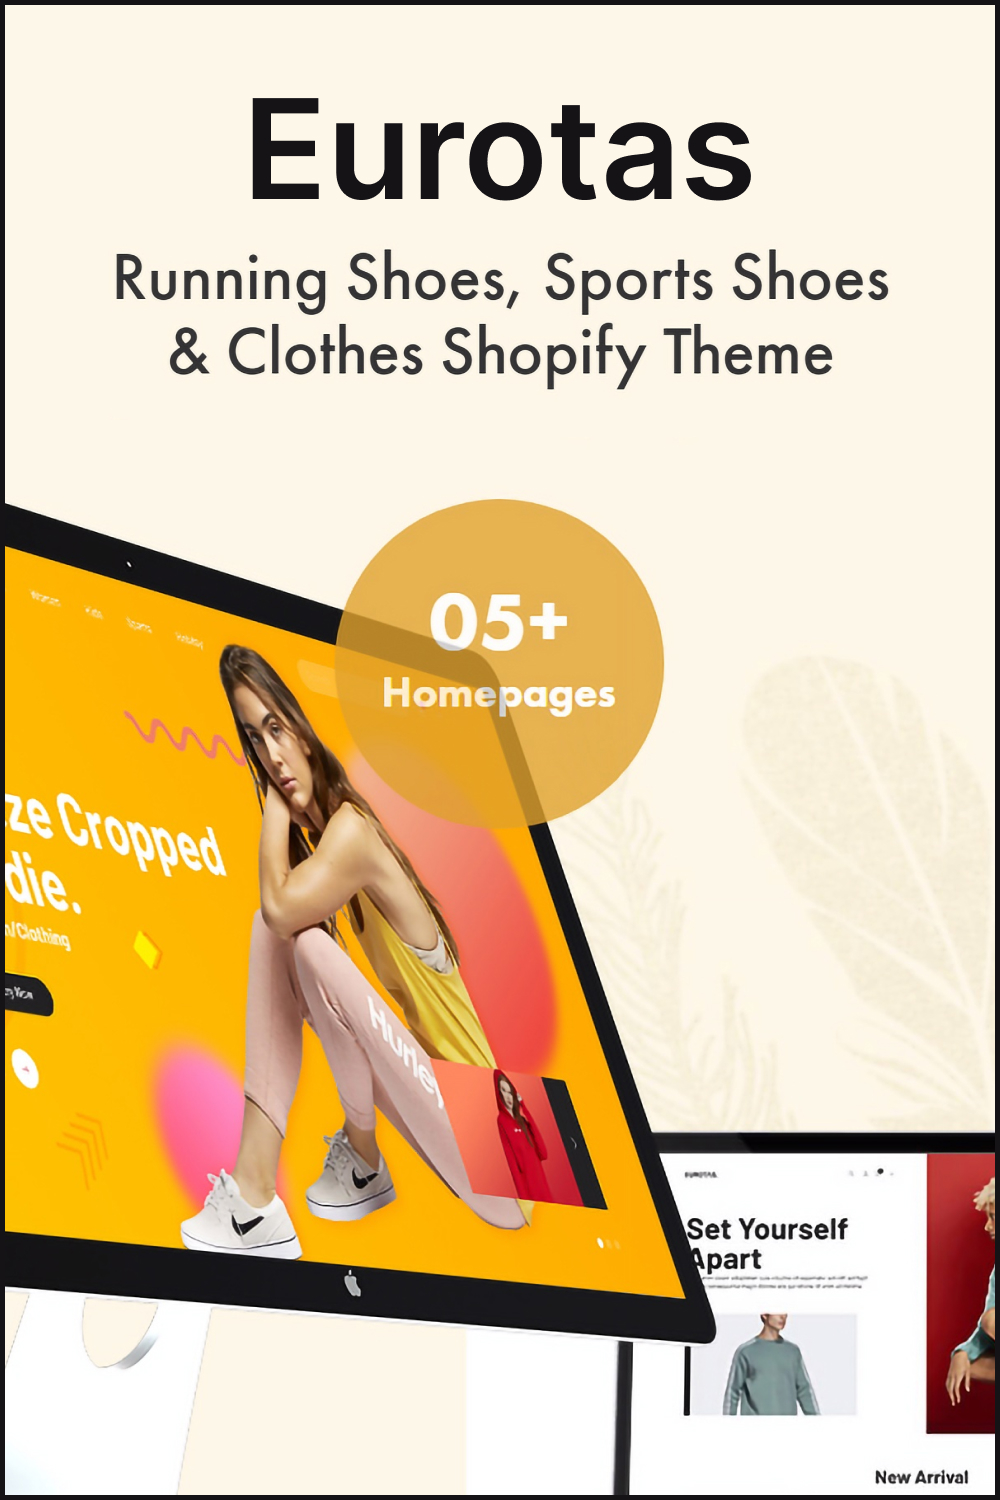 Pinterest illustrations of eurotas – running shoes sports shoes clothes shopify theme.